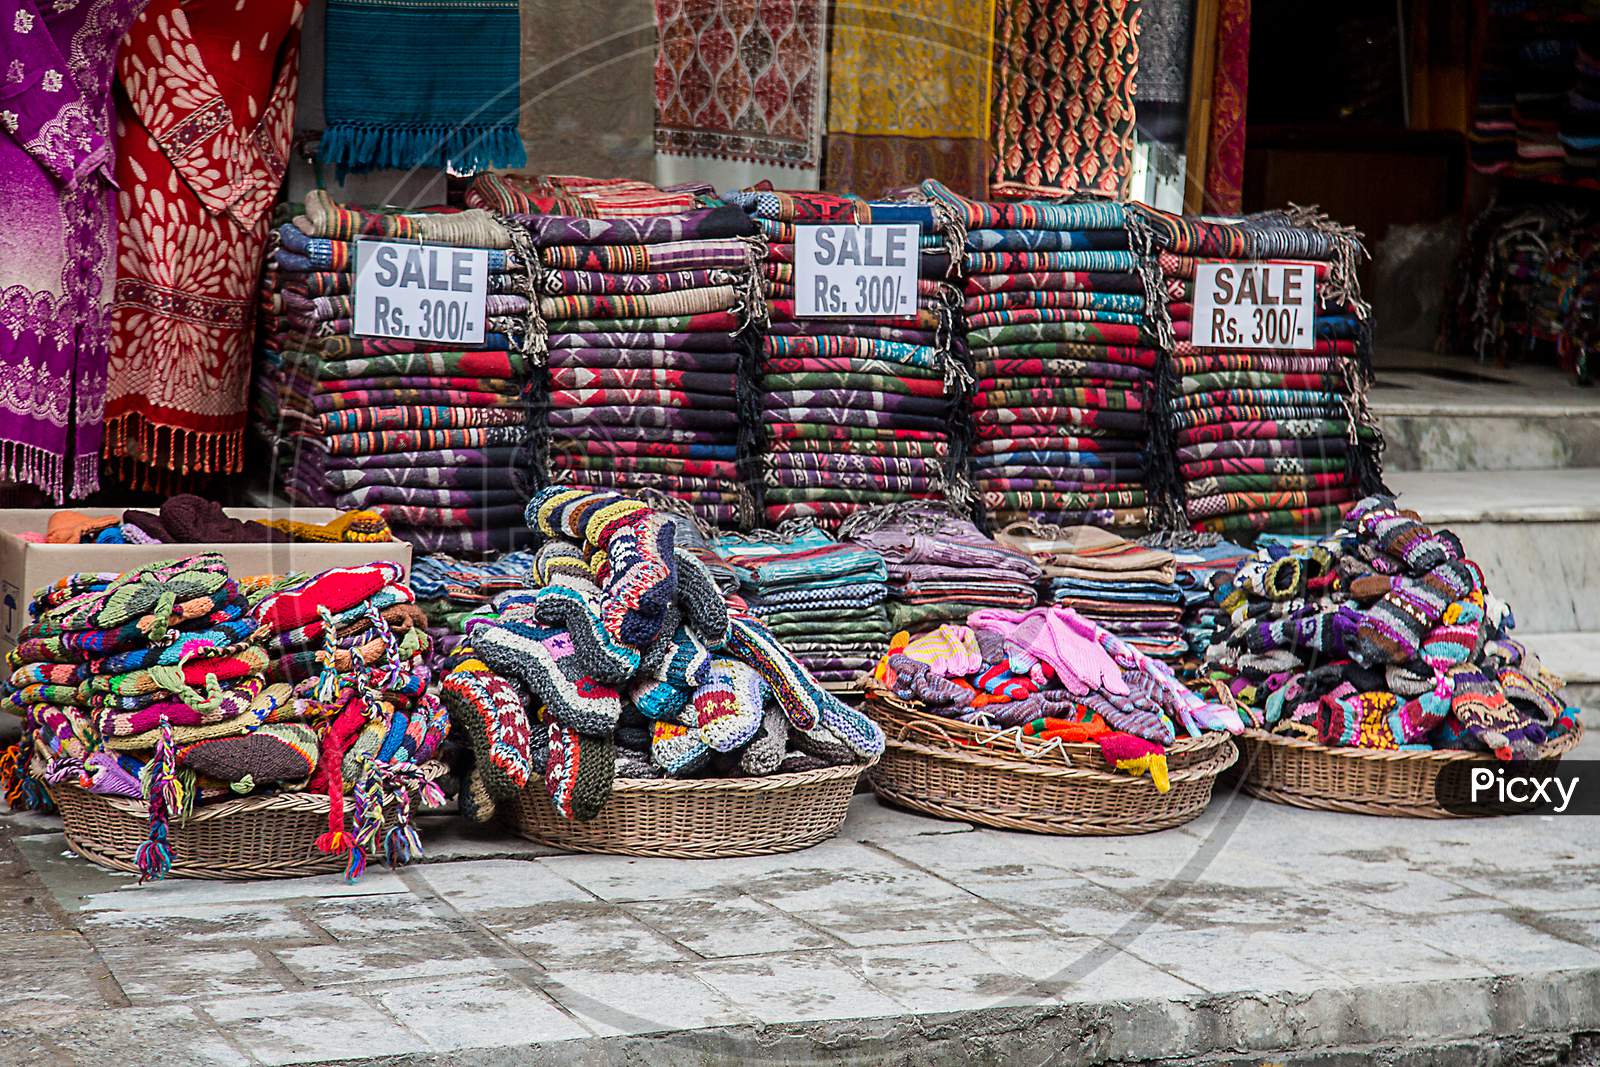 Handmade Traditional Winter Woolen Cloths Outside The Shop For Sale At Mall Road, Local Street Market - Image